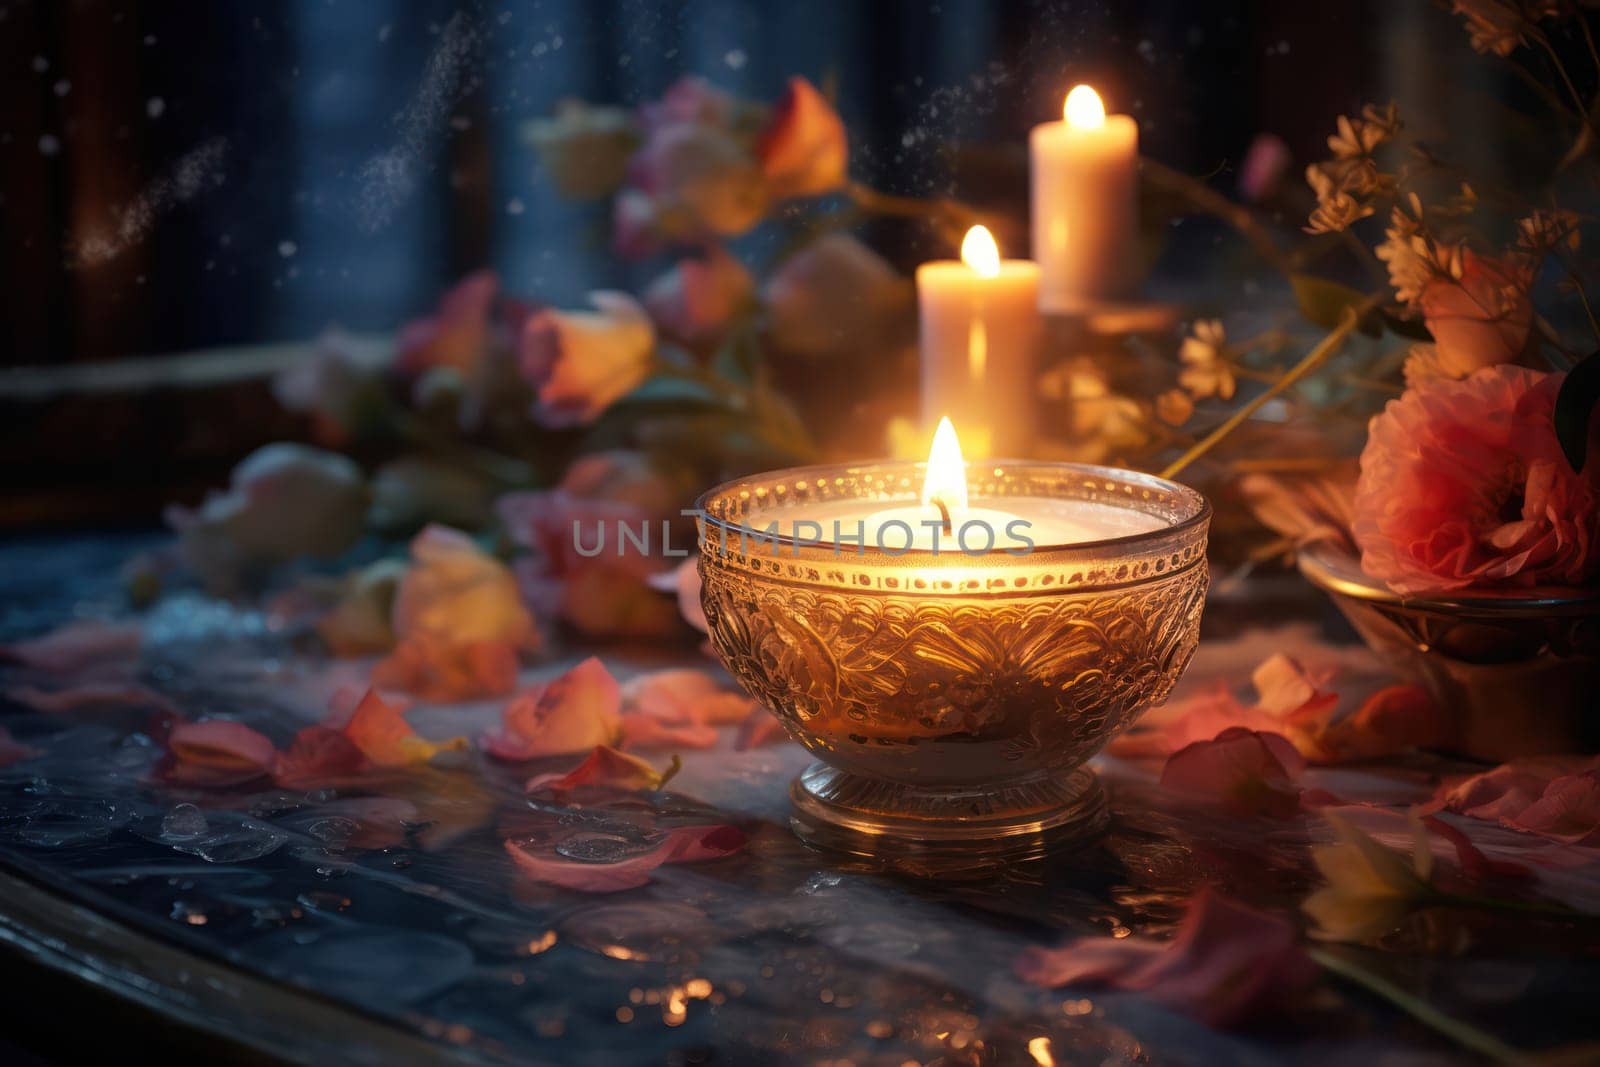 Glowing Candlelight: A Romantic Night of Peace and Romance.